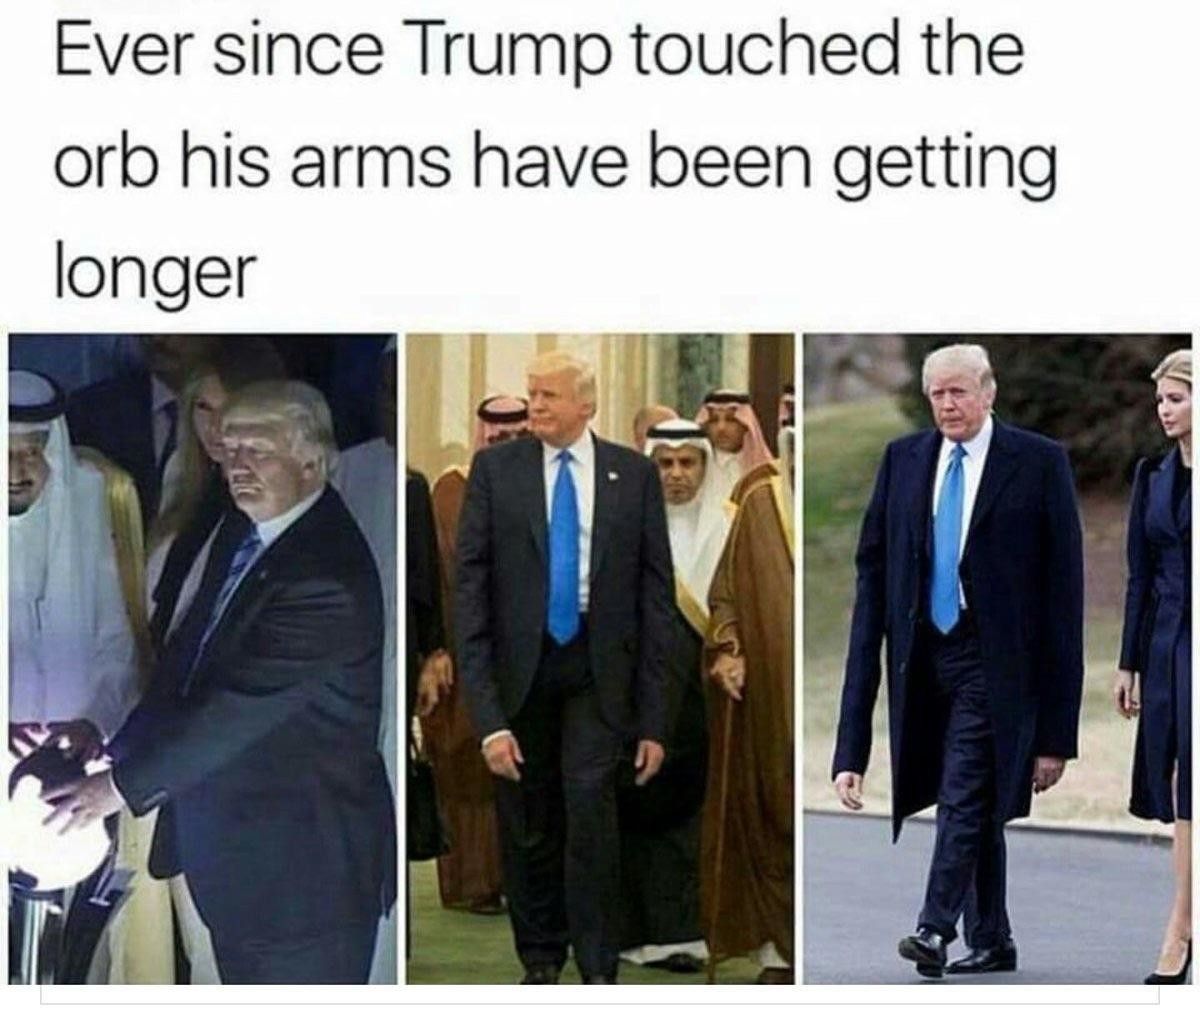 soon he will grab pussy from across the world...